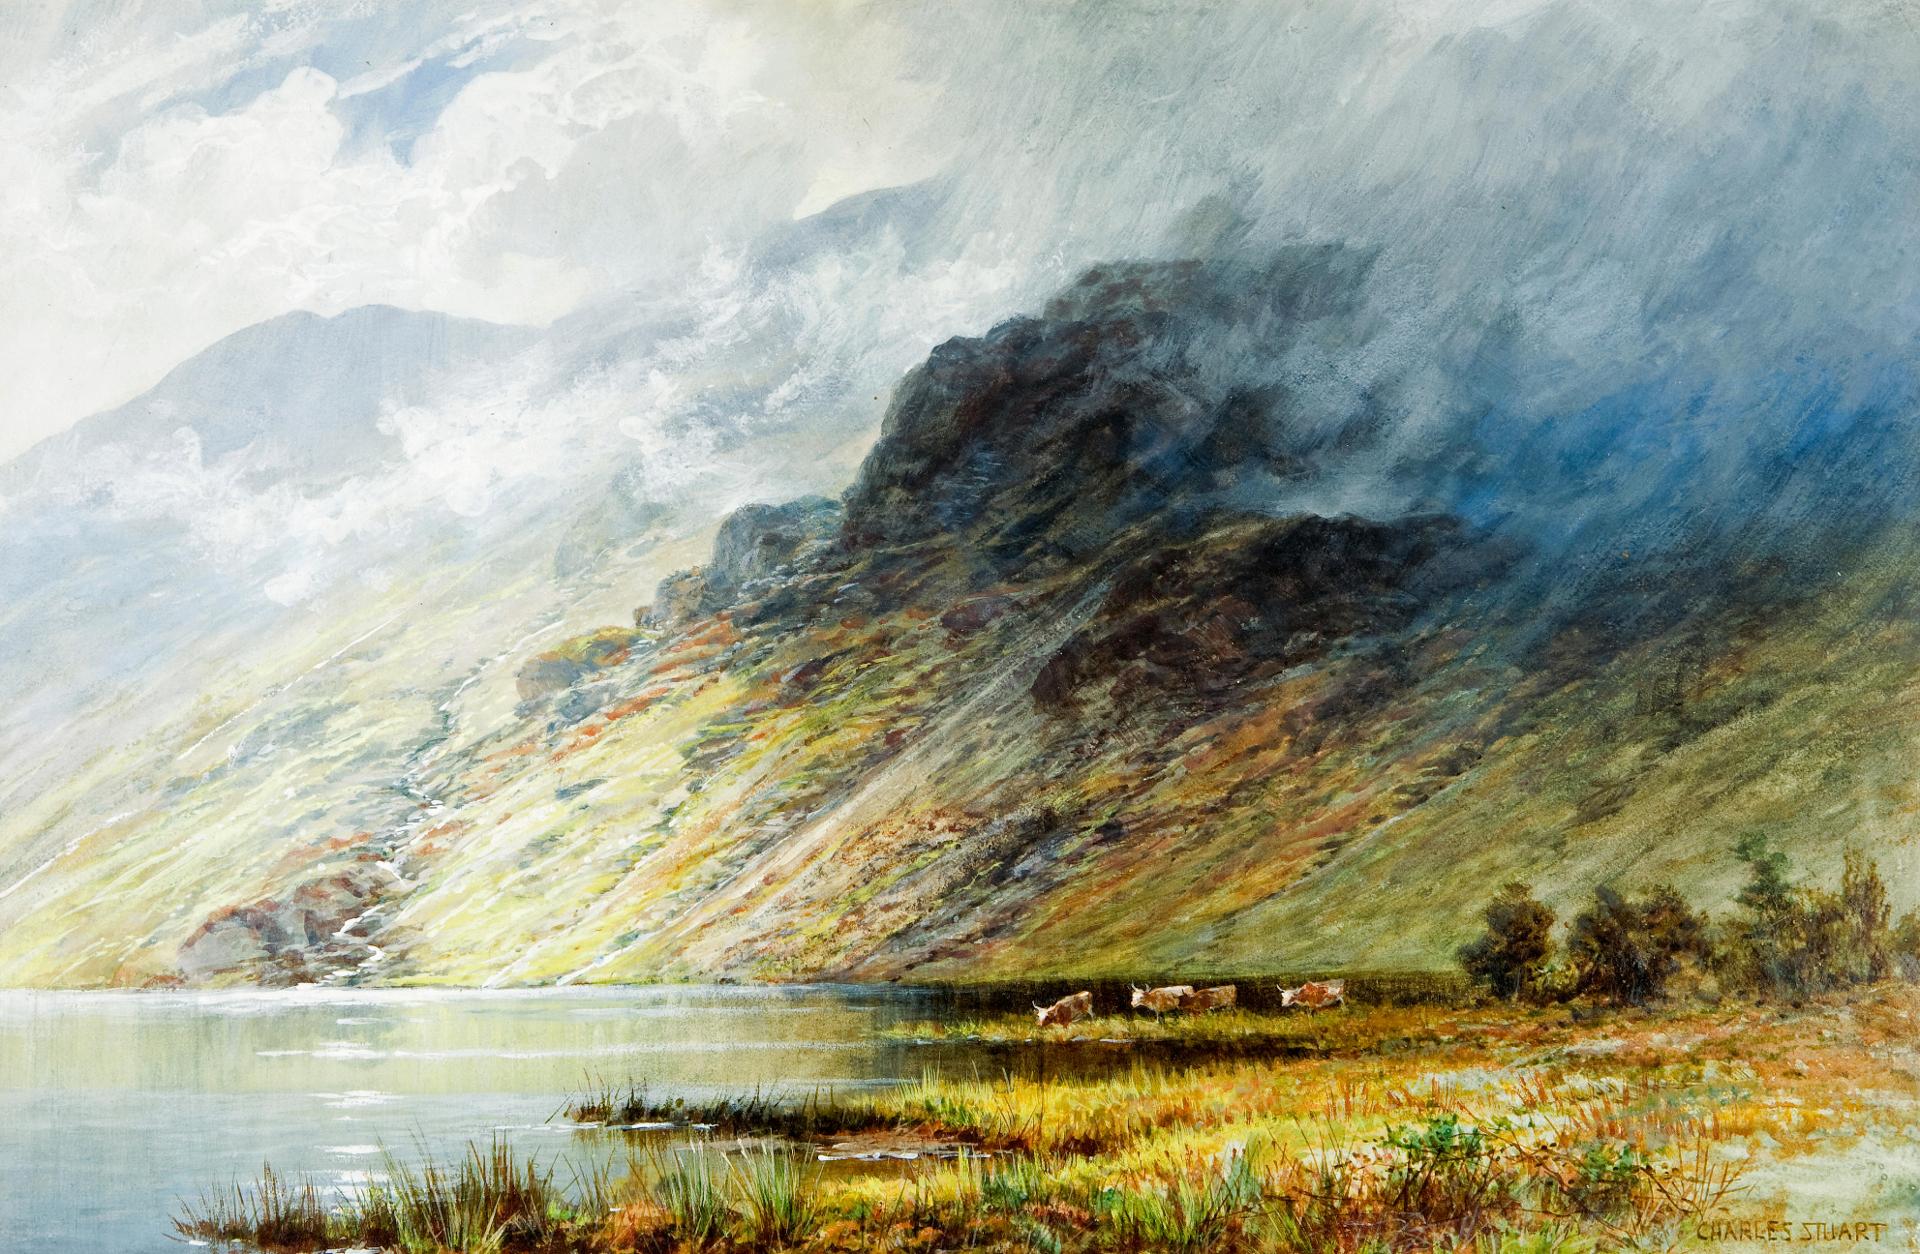 Charles Stuart - Cattle by the shores of a loch